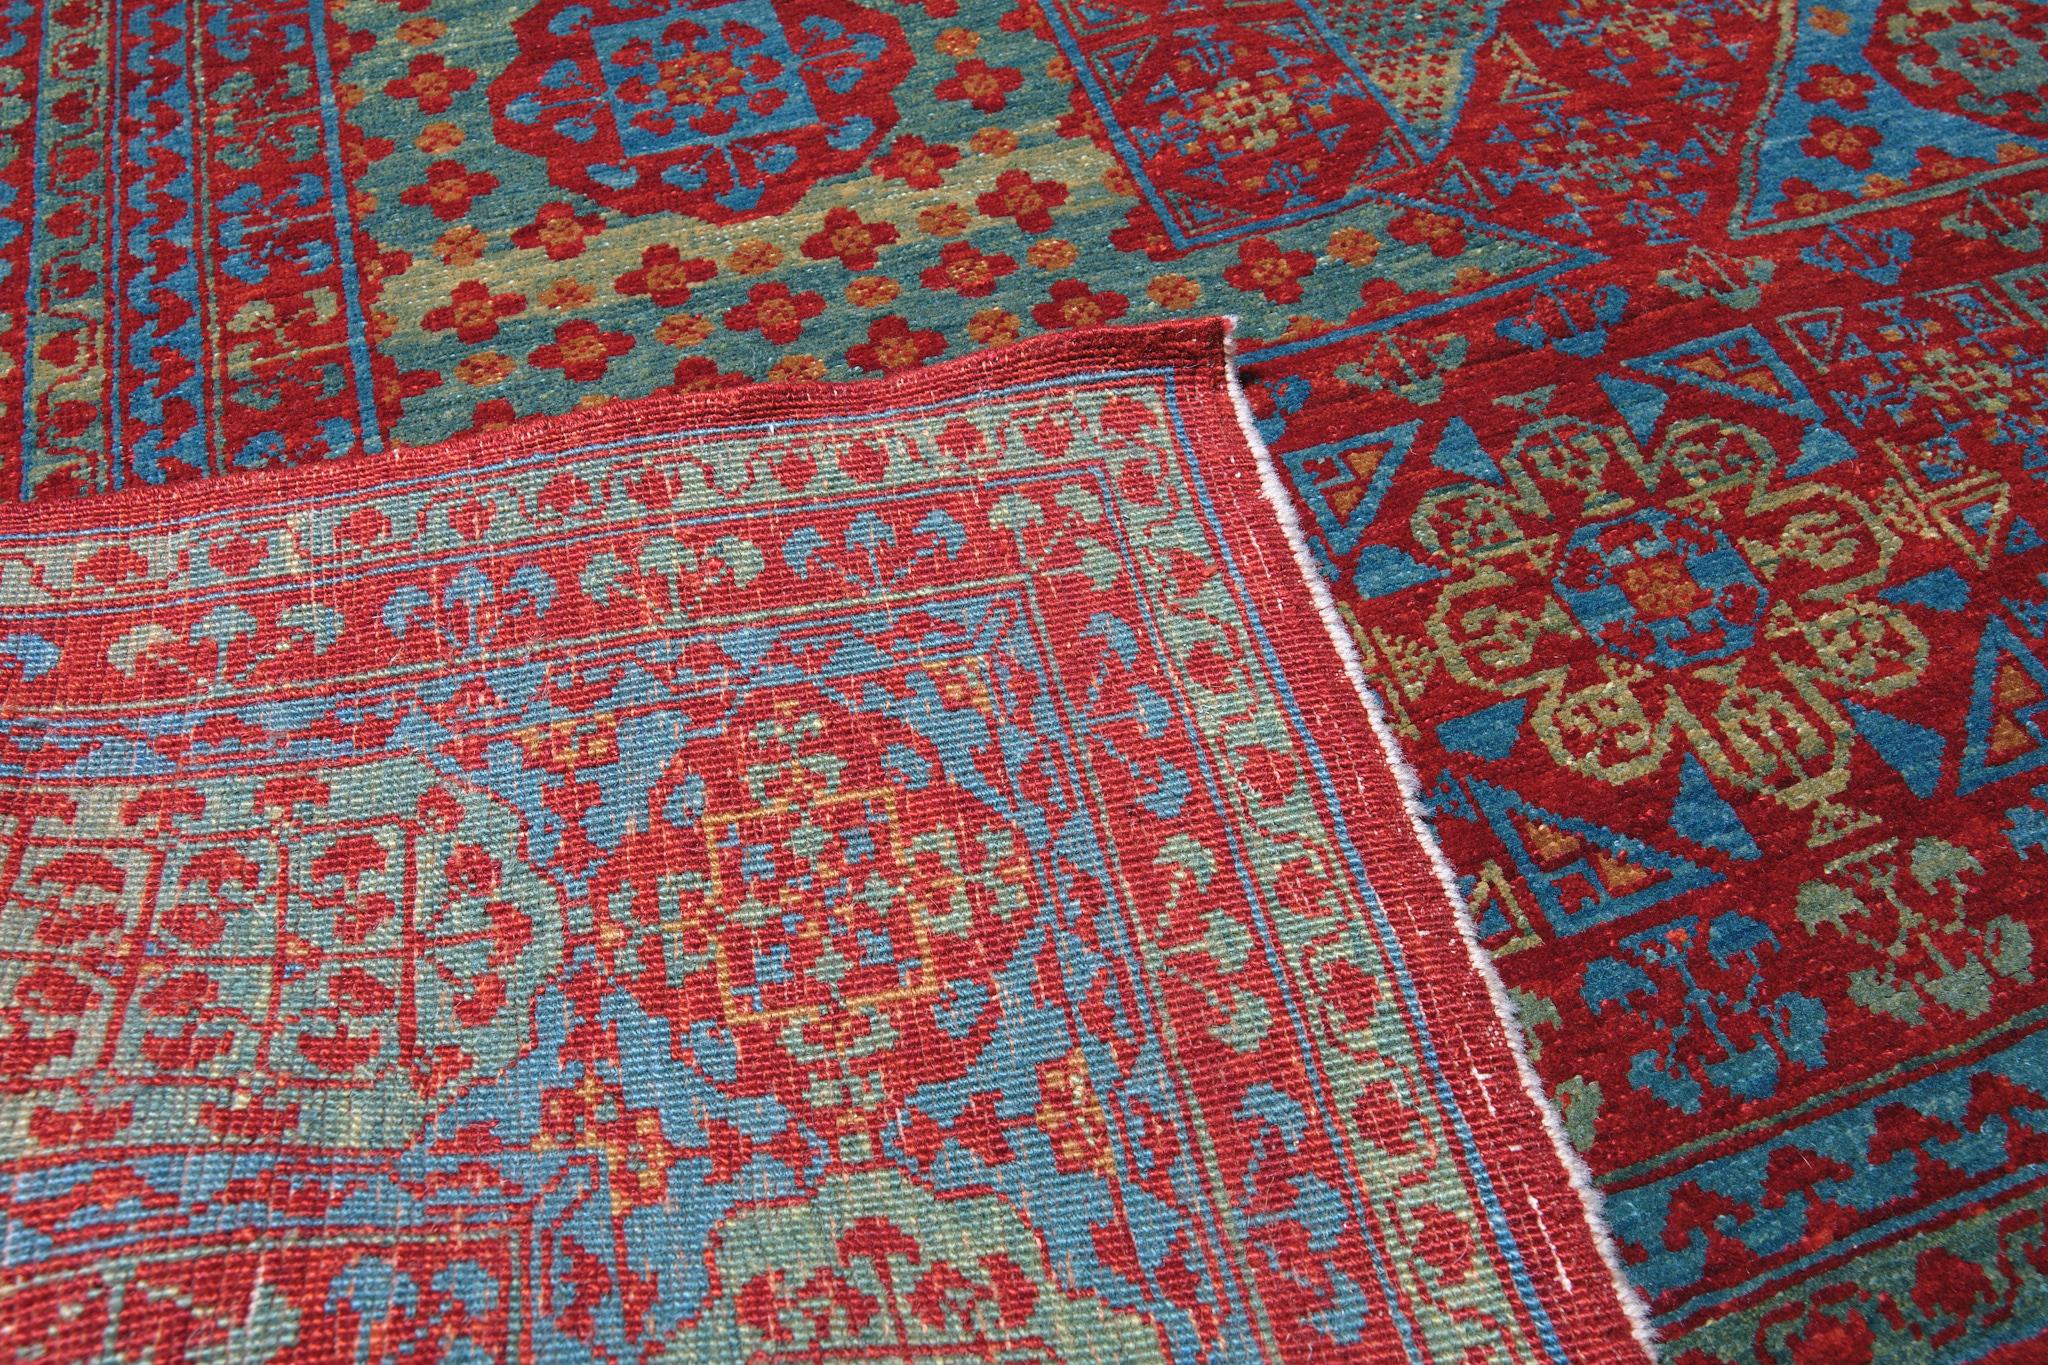 Turkish Ararat Rugs Mamluk Rug with Central Star, 16th C. Revival Carpet, Natural Dyed For Sale